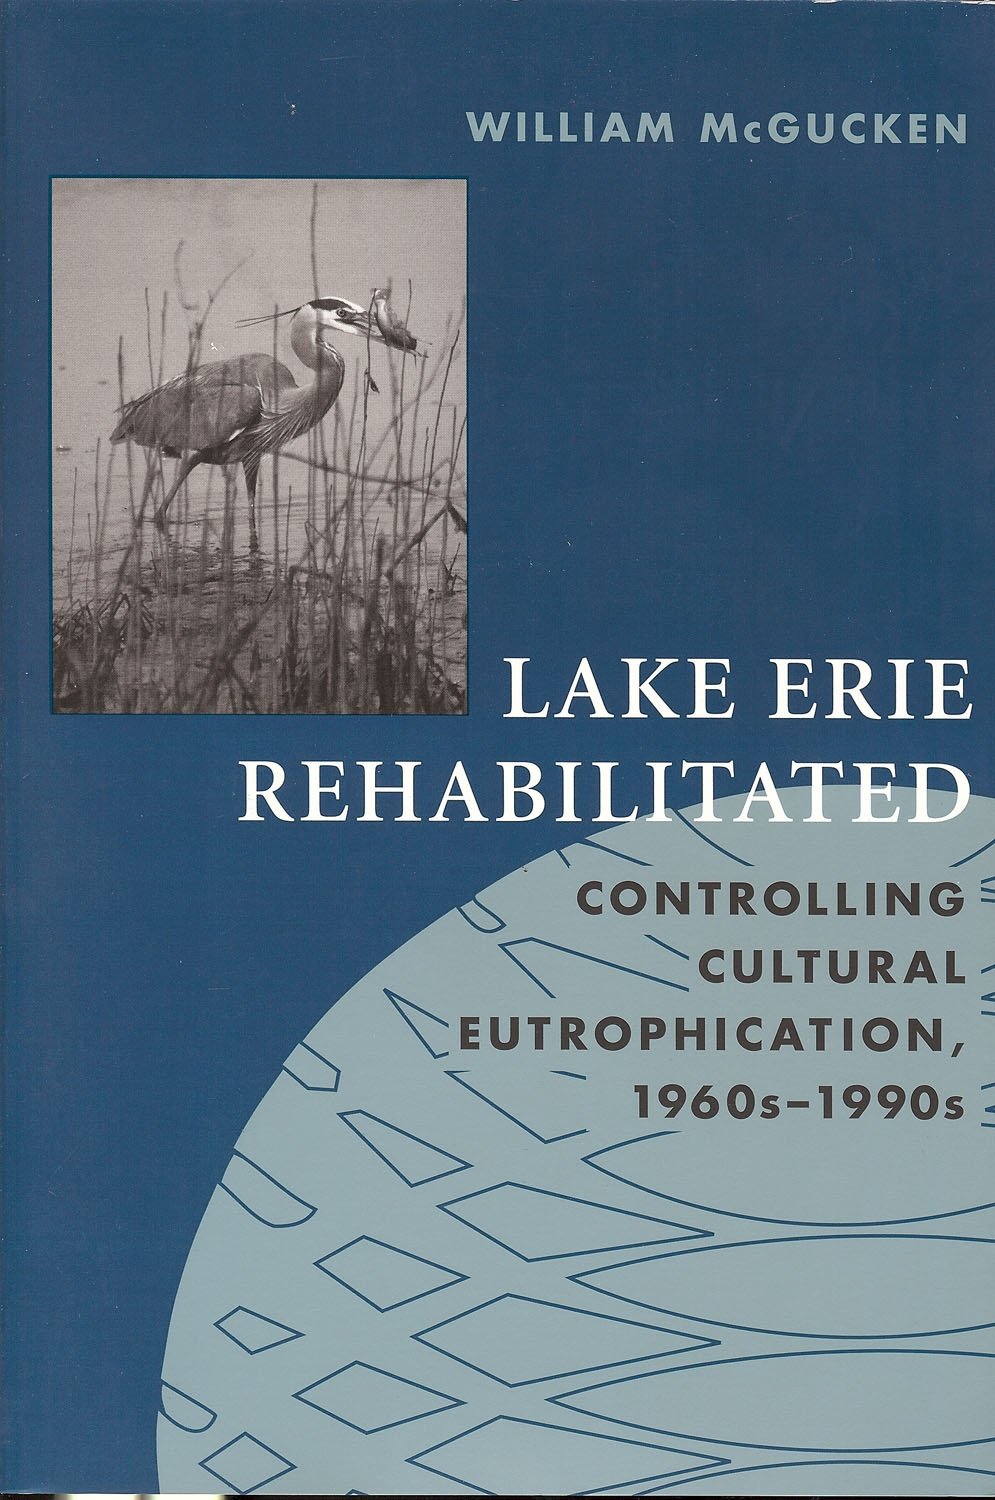 Lake Erie Rehabilitated: Controlling Cultural Eutrophication 1960s-1990s